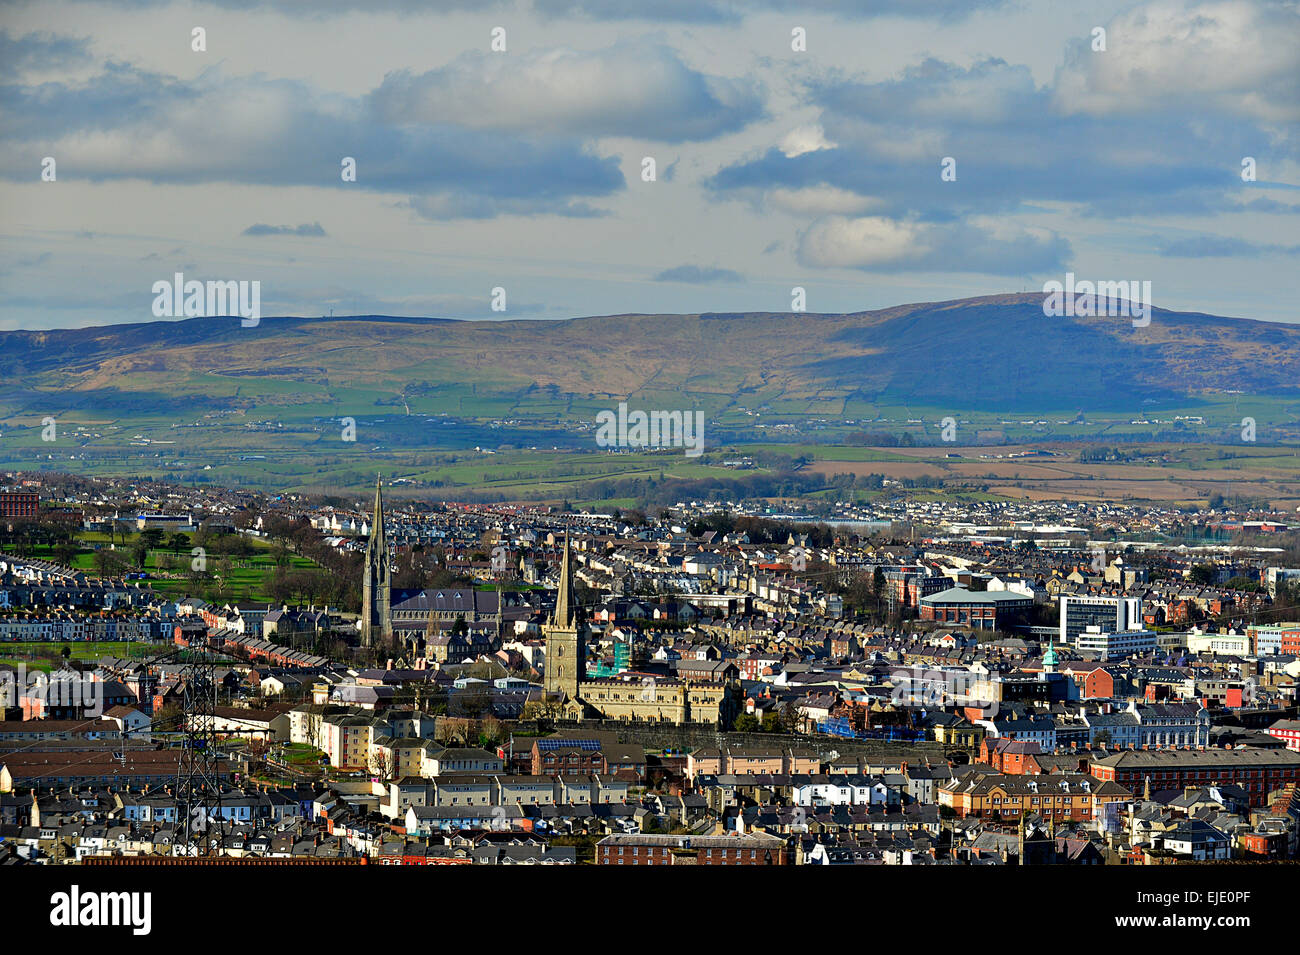 Londonderry, Derry, skyline and two cathedrals Stock Photo